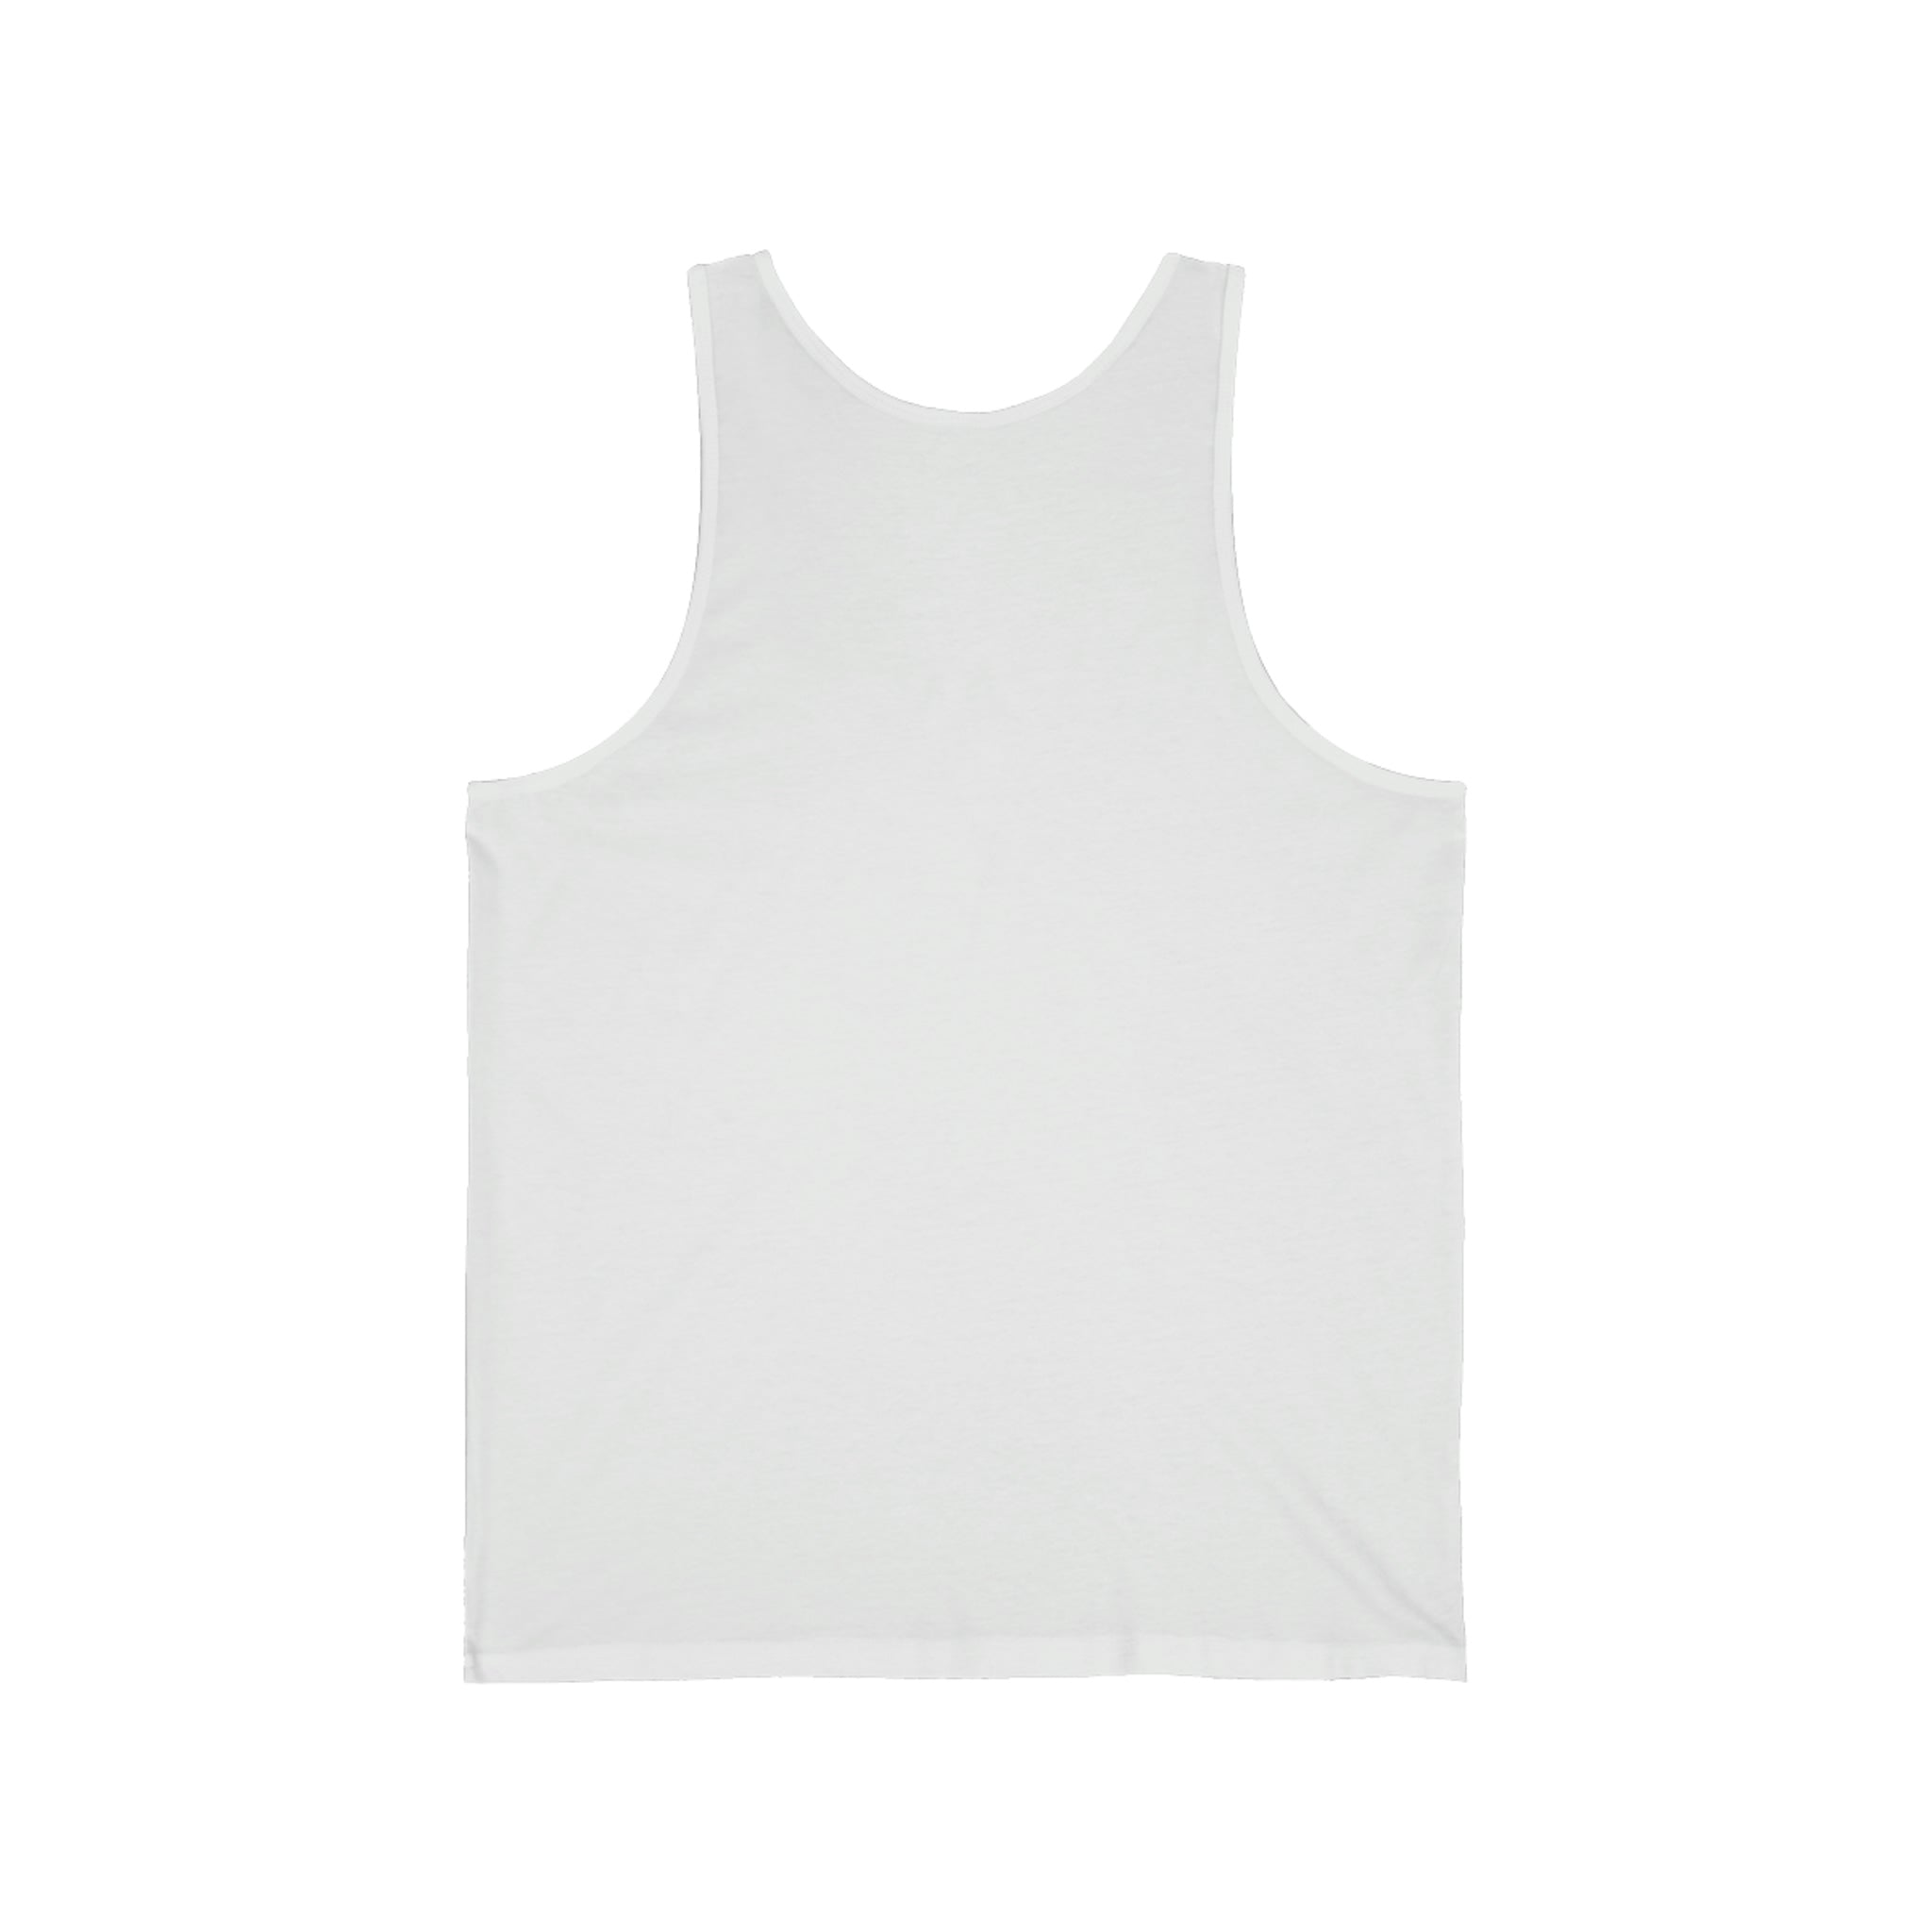 Unisex muscle mommy tank top